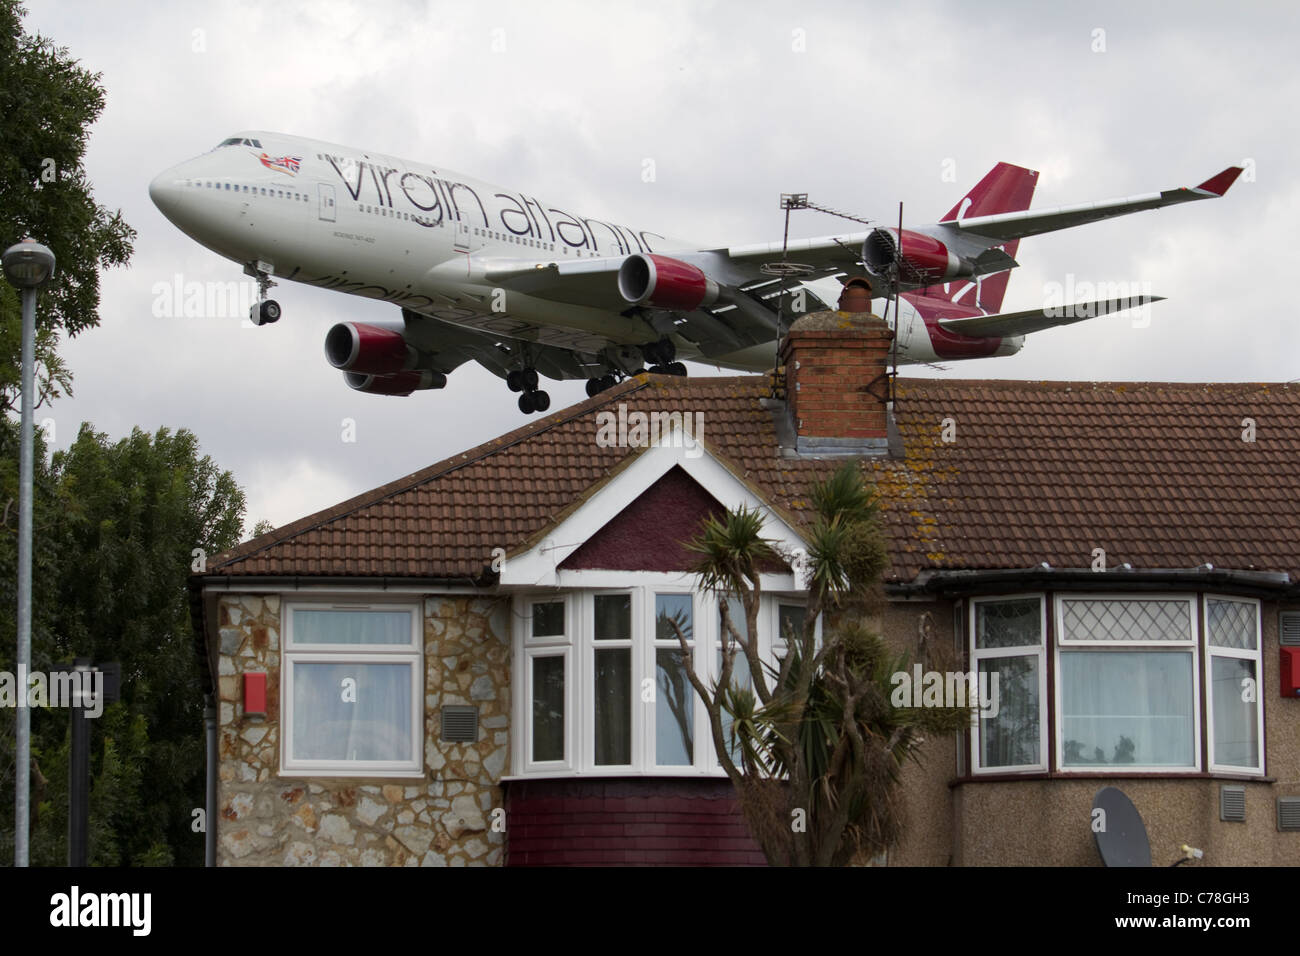 Low flying aircraft Heathrow airport approach Virgin atlantic, noise pollution with residential housing Stock Photo